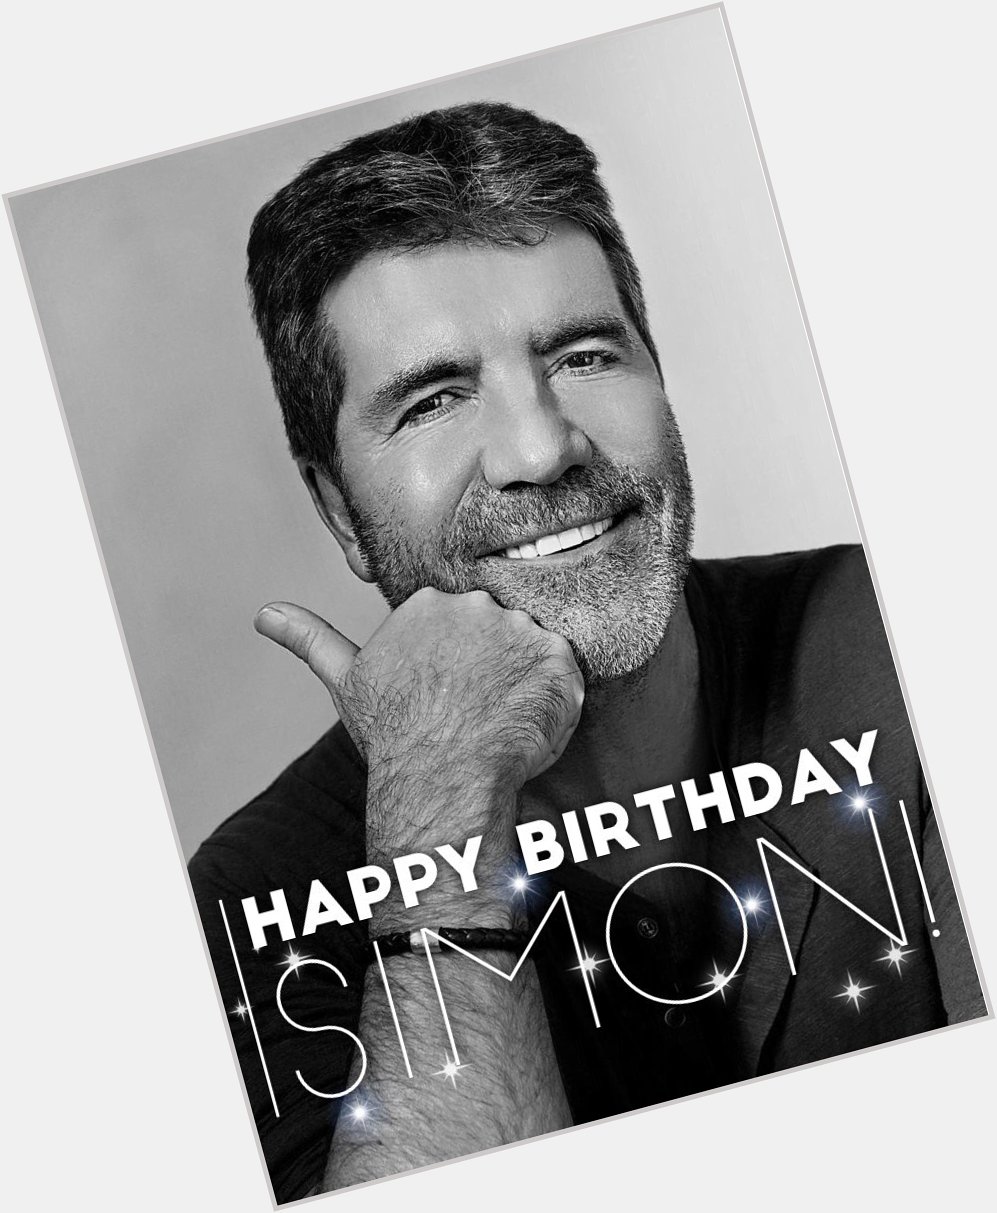 Please join us in wishing Simon Cowell a very happy birthday today!        